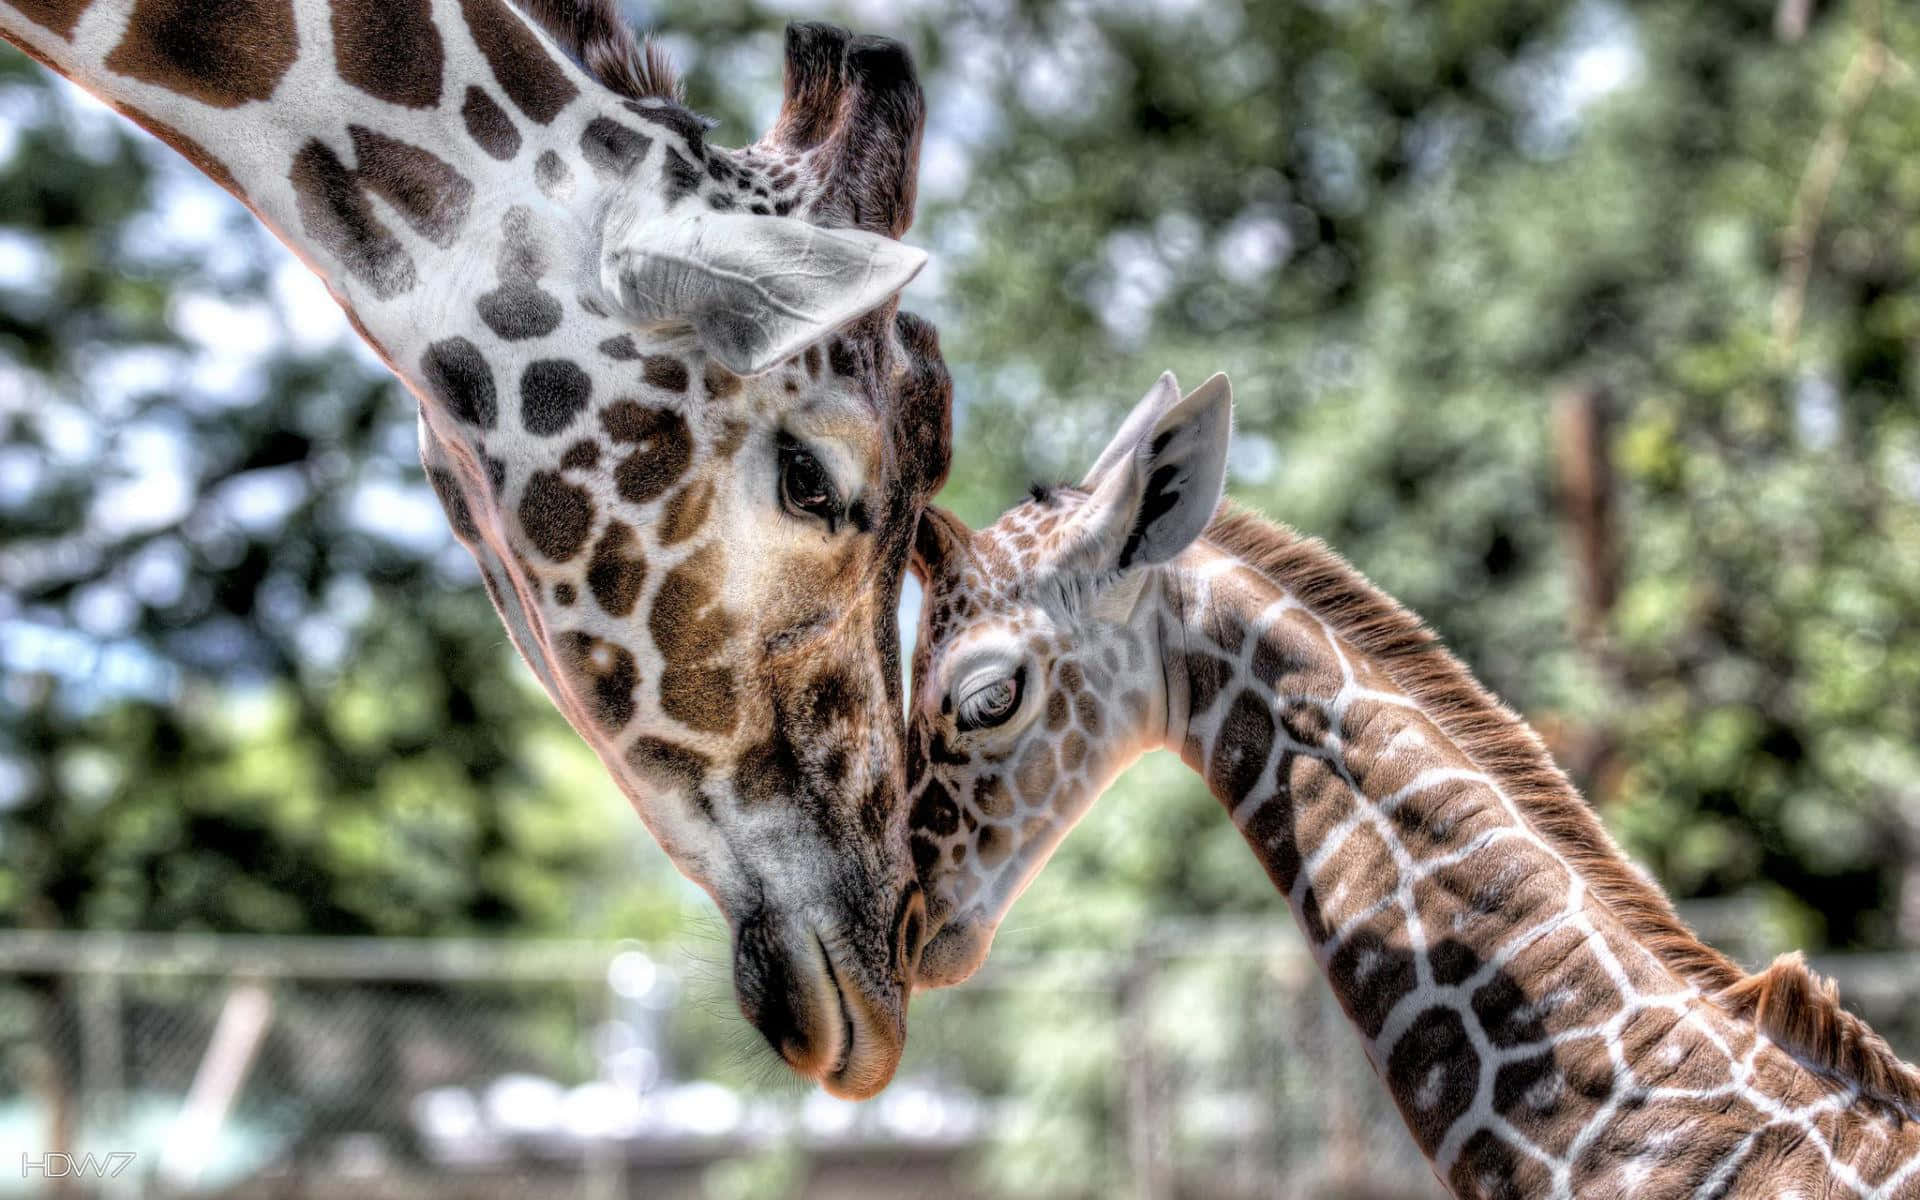 A sweet baby giraffe takes a look at the camera